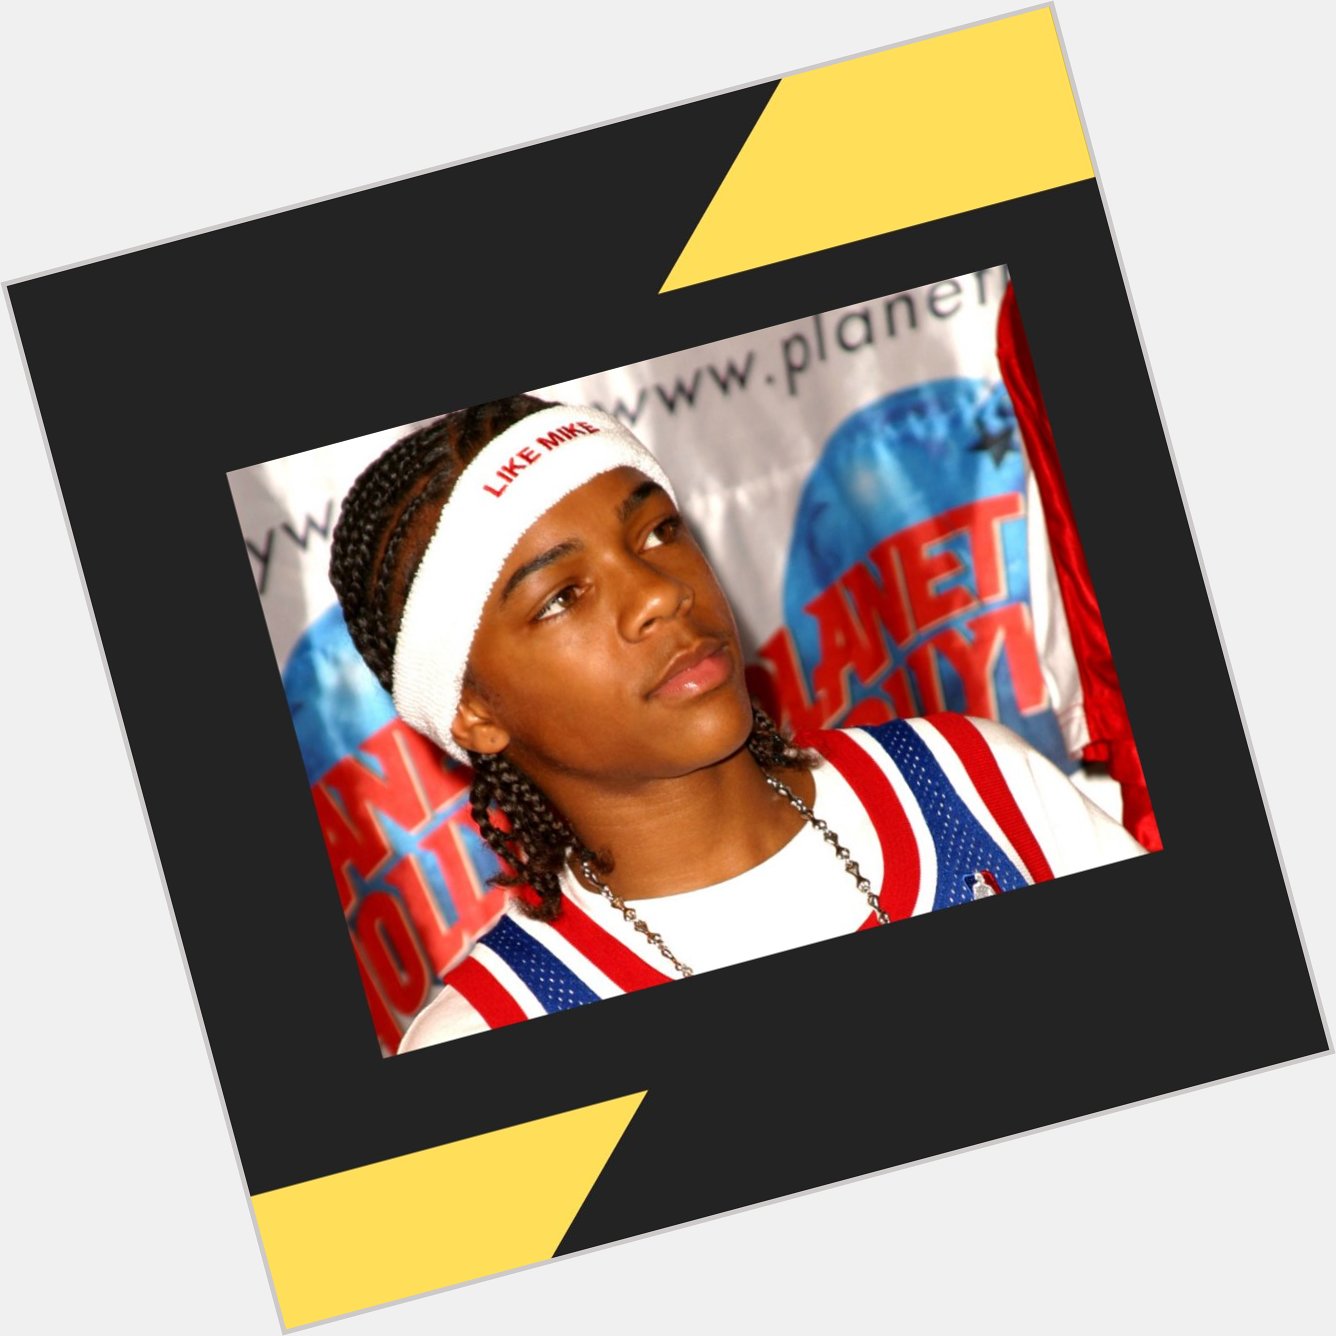 Today we celebrate a real one\s birthday. Happy birthday Bow Wow! 